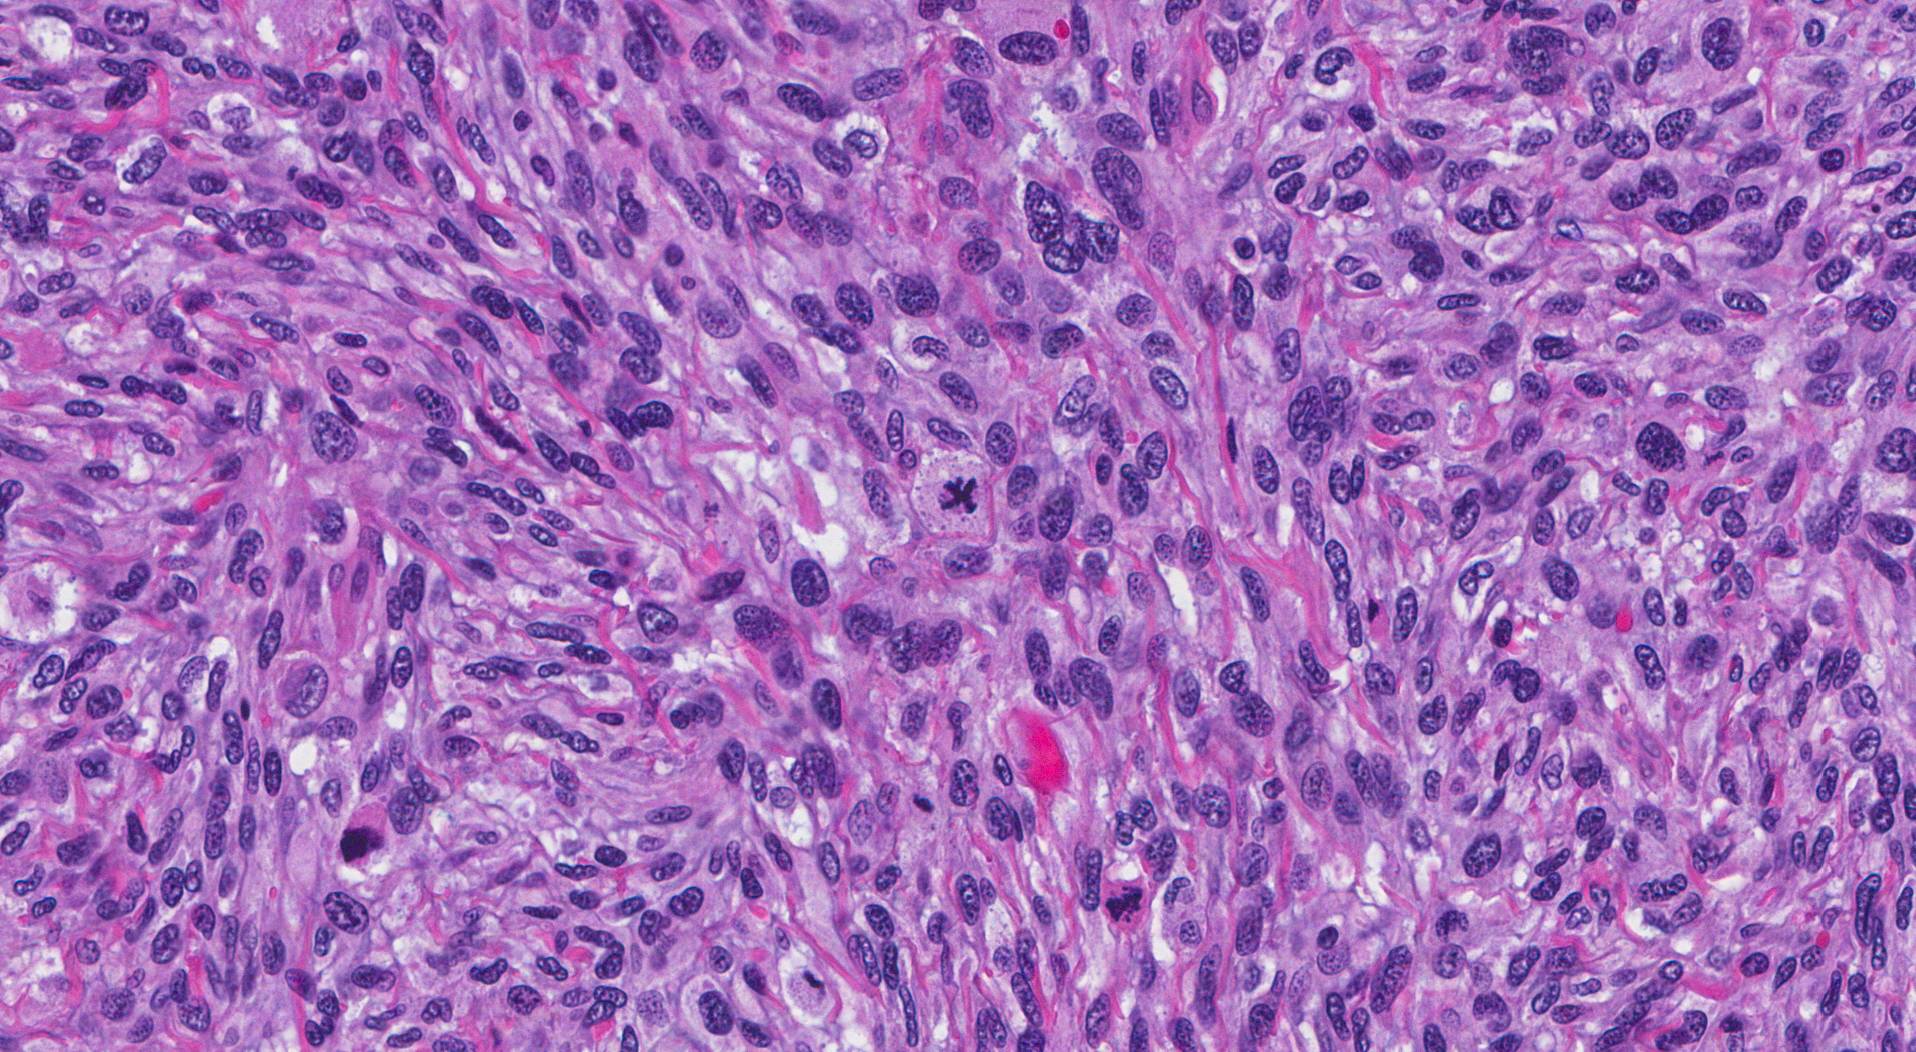 This picture shows an example of a sarcoma arising in soft tissue.